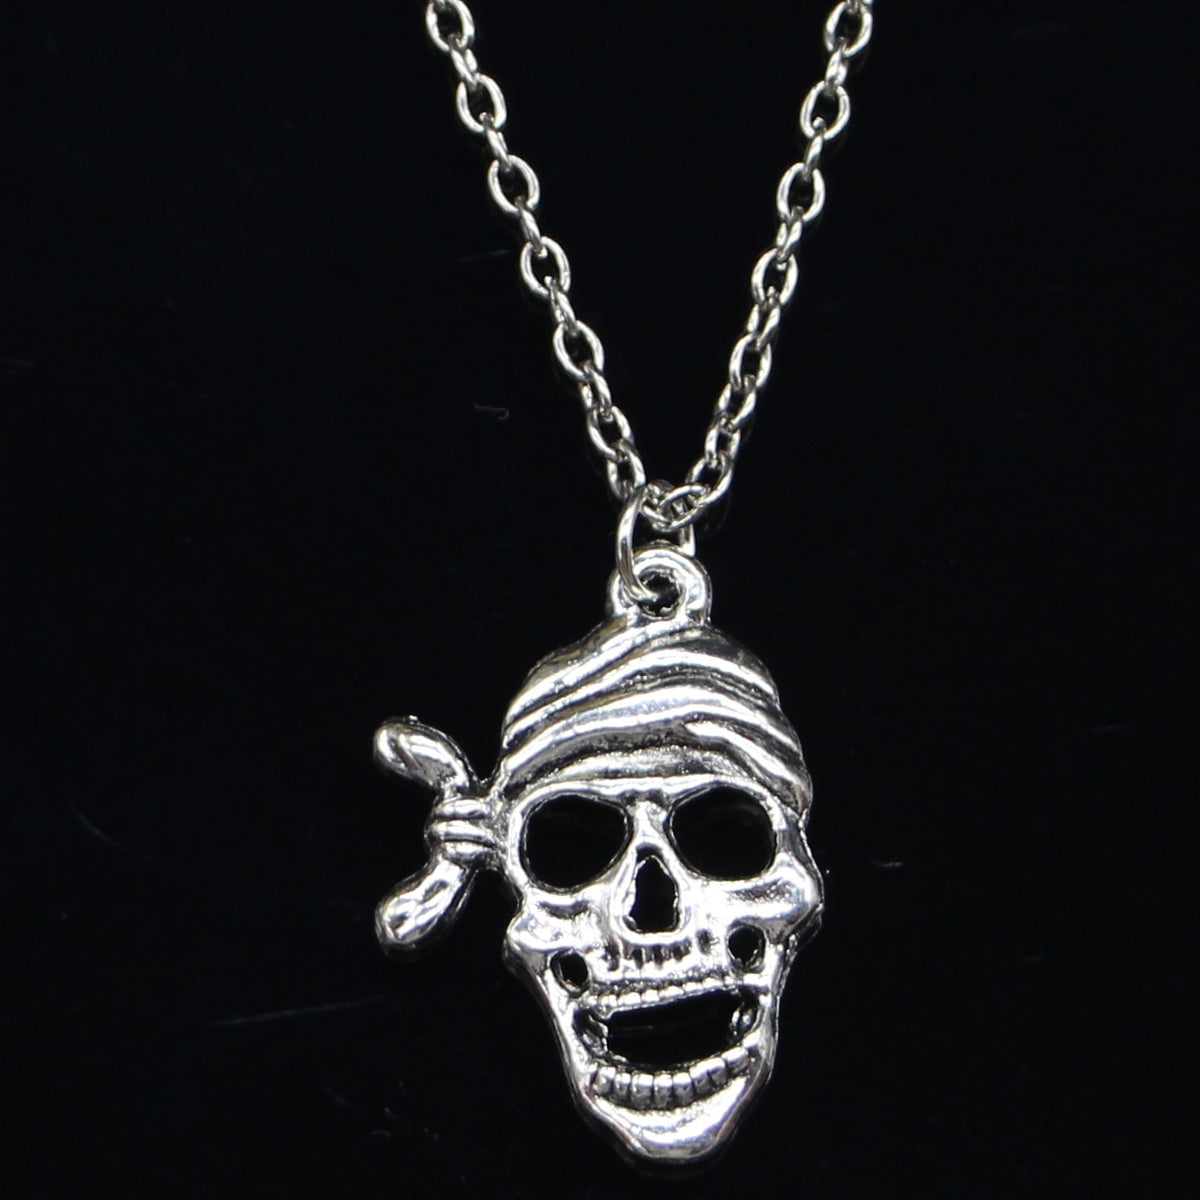 Laughing Skull Pendant Necklaces